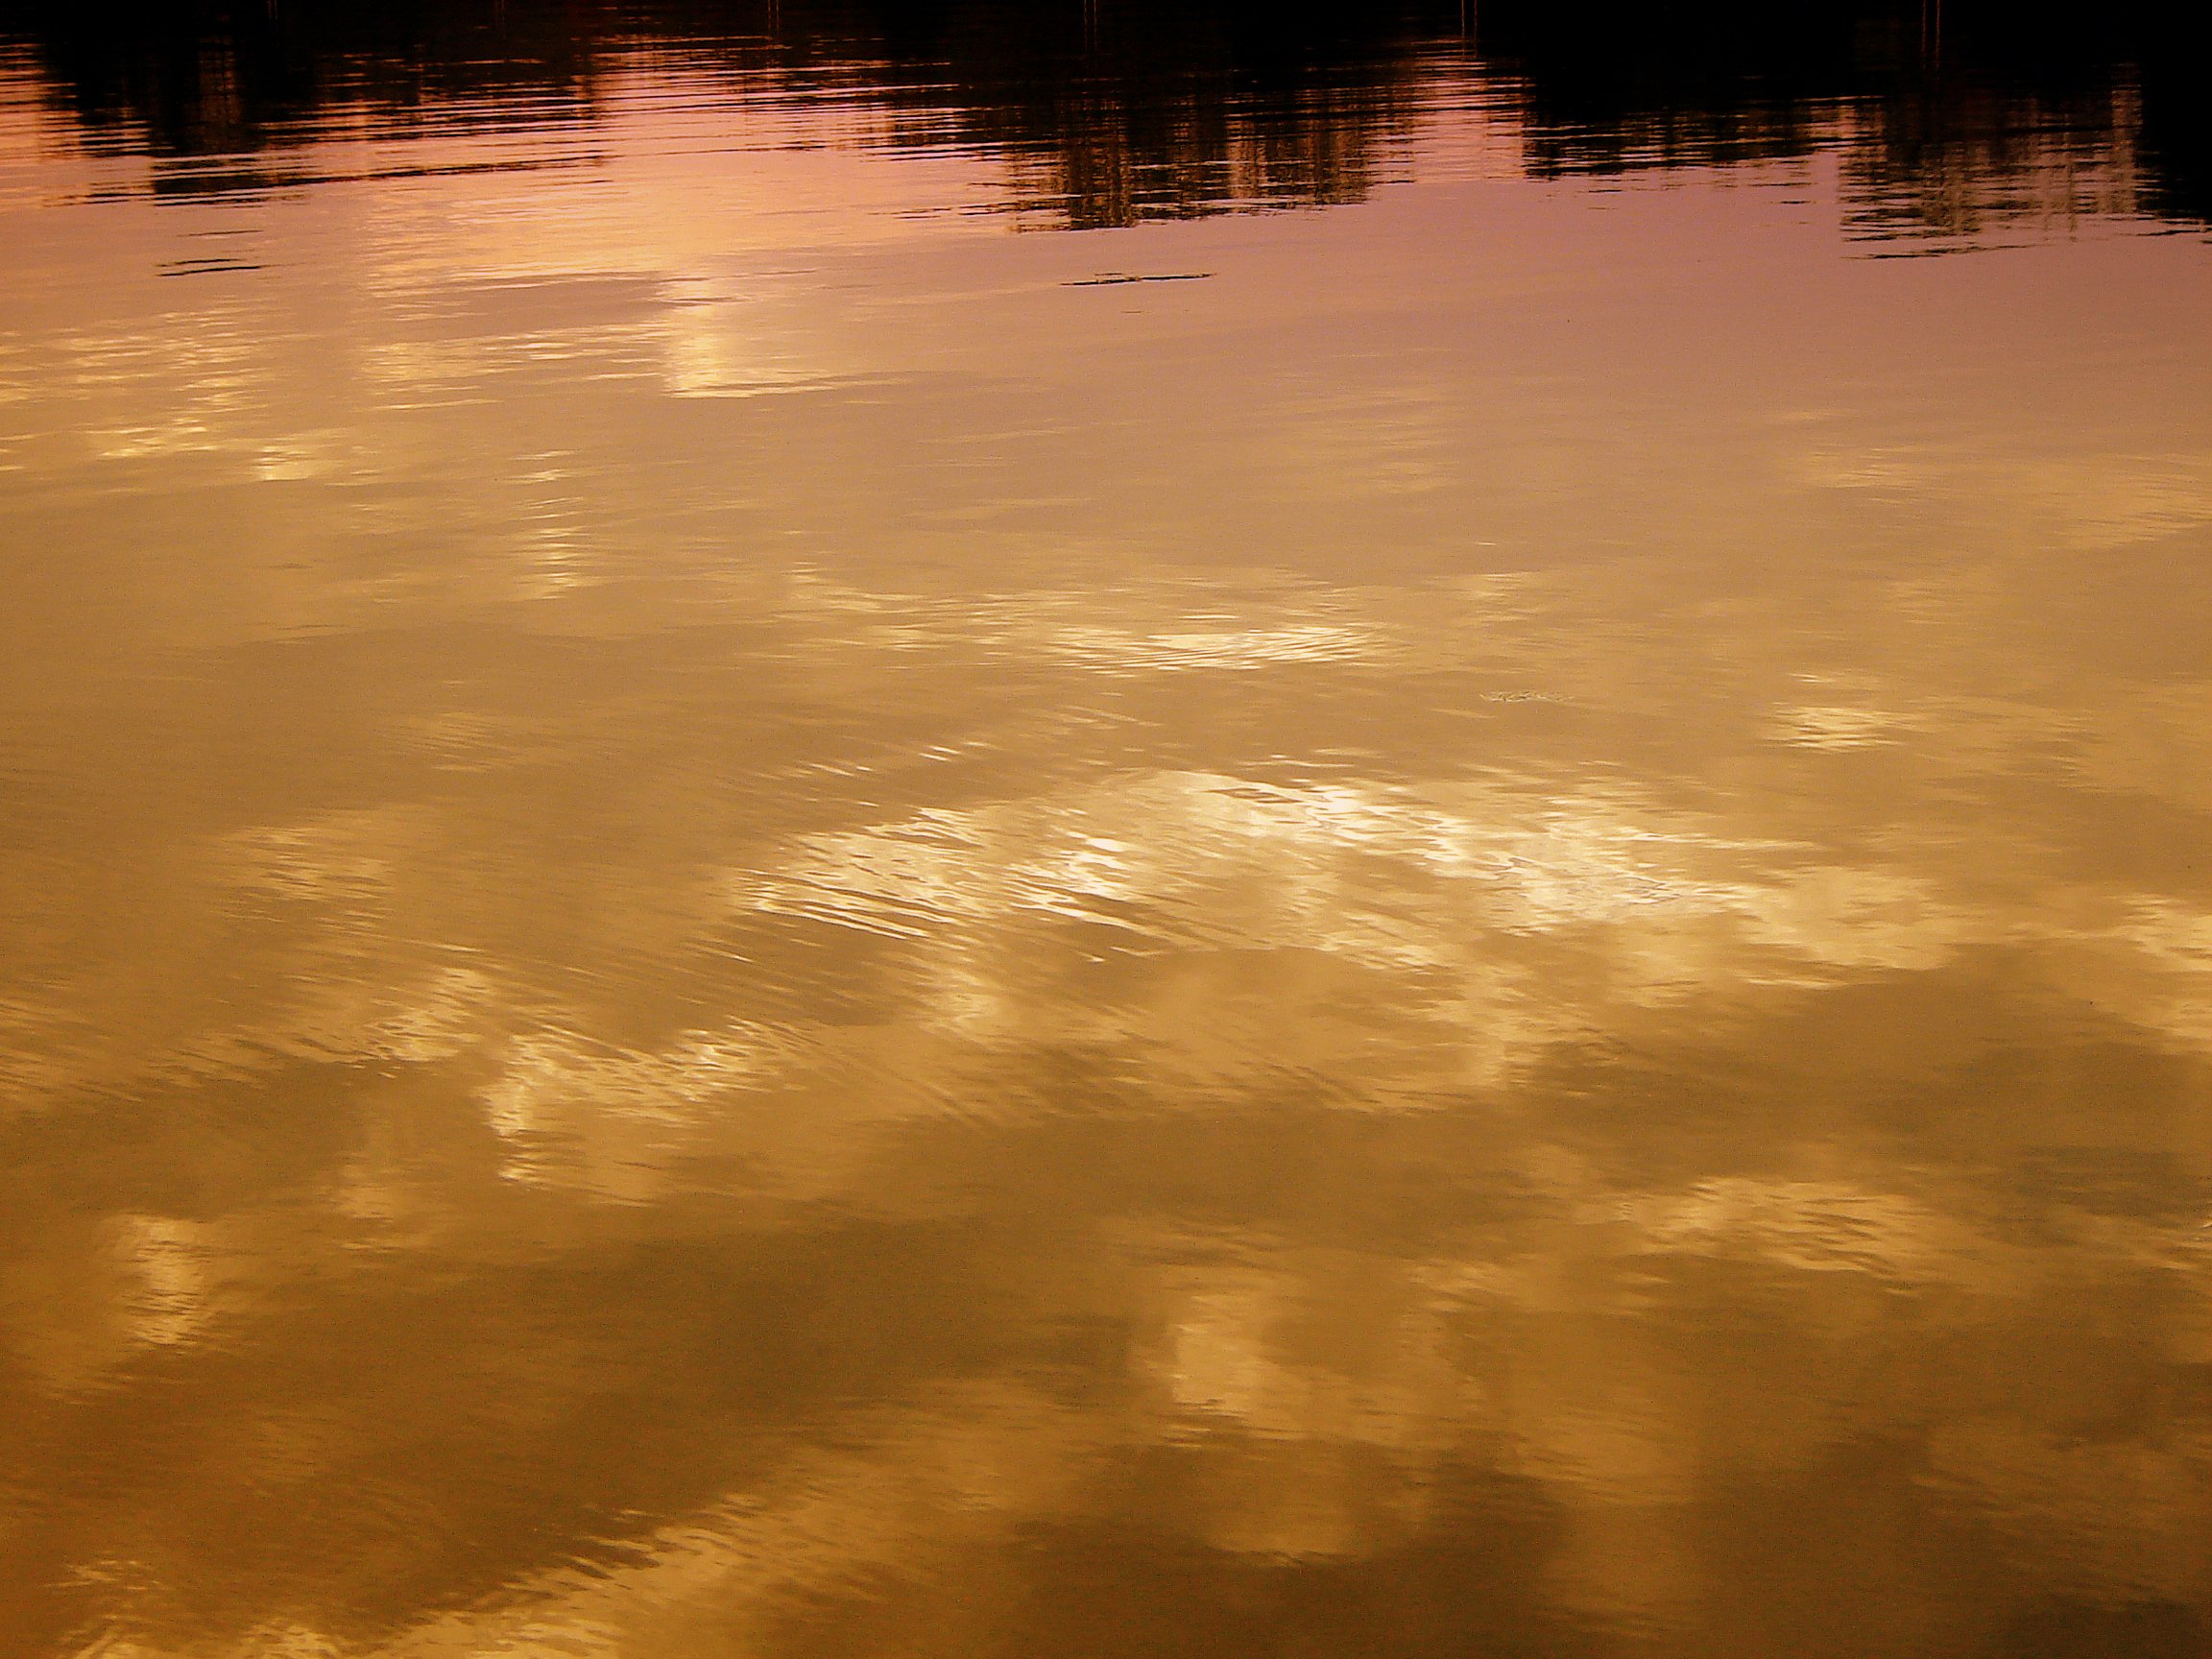 Water reflections, Brown, Bspo06, Light, Reflection, HQ Photo